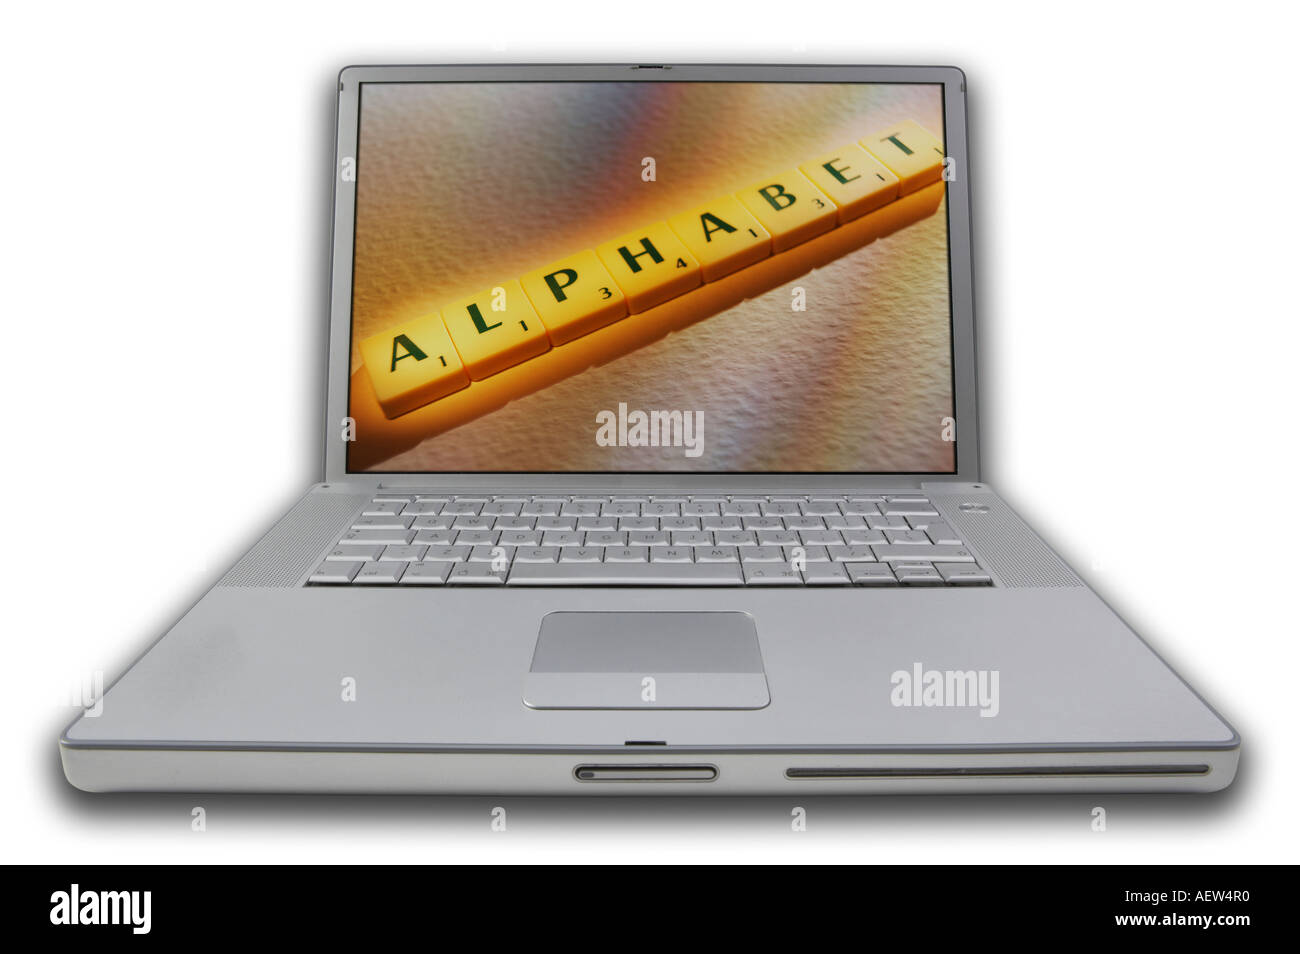 LAP TOP COMPUTER WITH SCRABBLE LETTERS ON SCREEN SPELLING WORDS ALPHABET Stock Photo